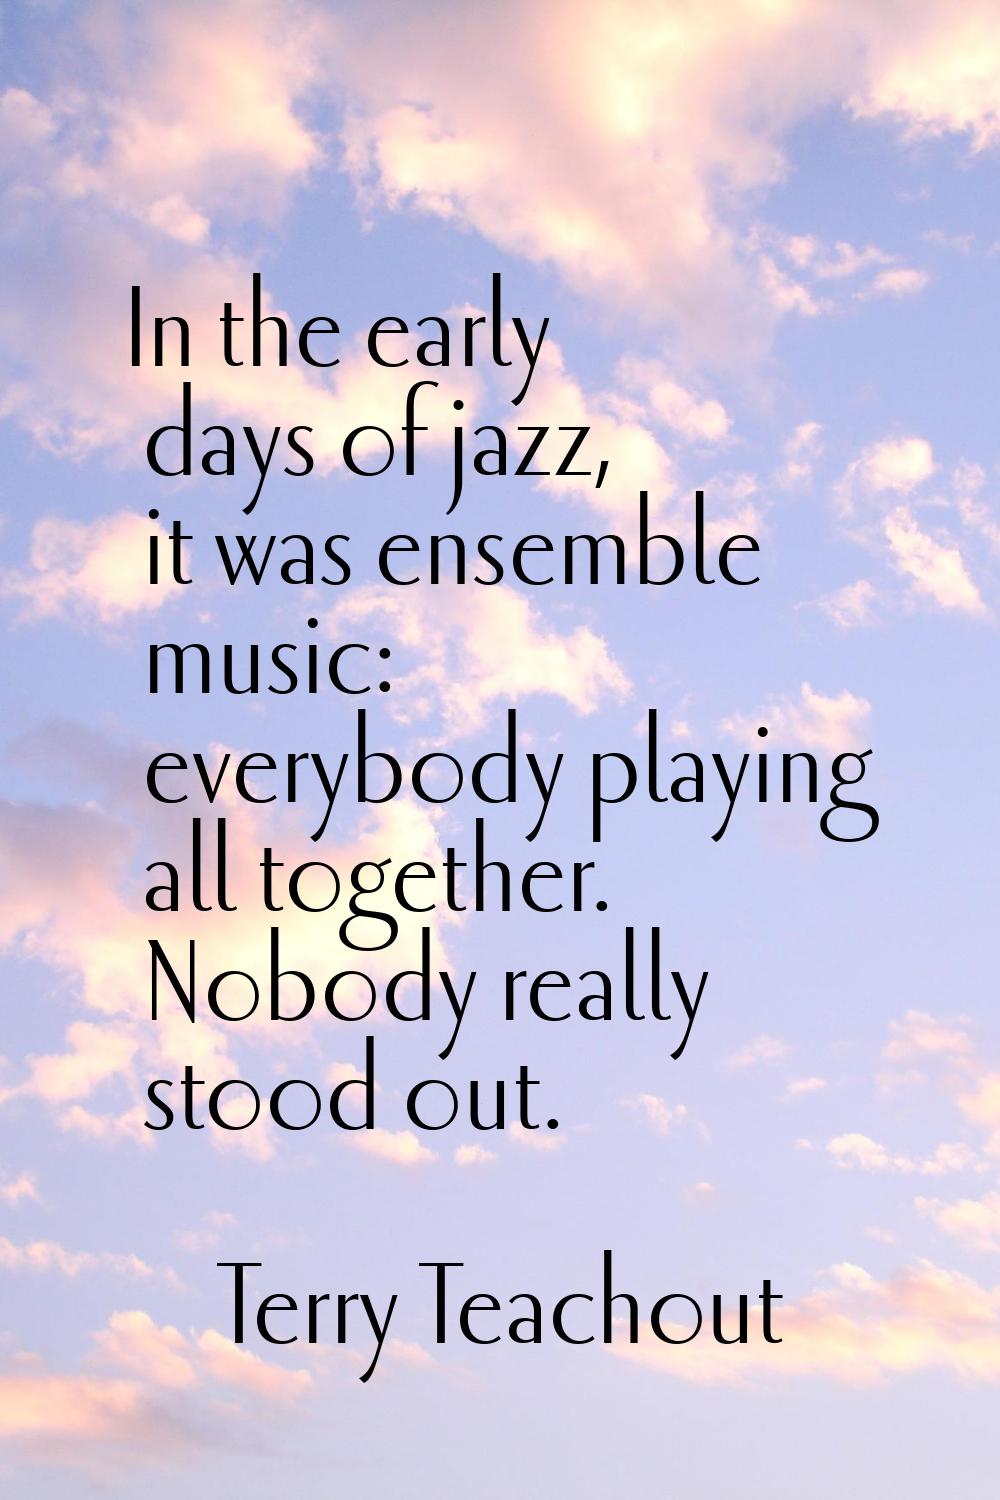 In the early days of jazz, it was ensemble music: everybody playing all together. Nobody really sto